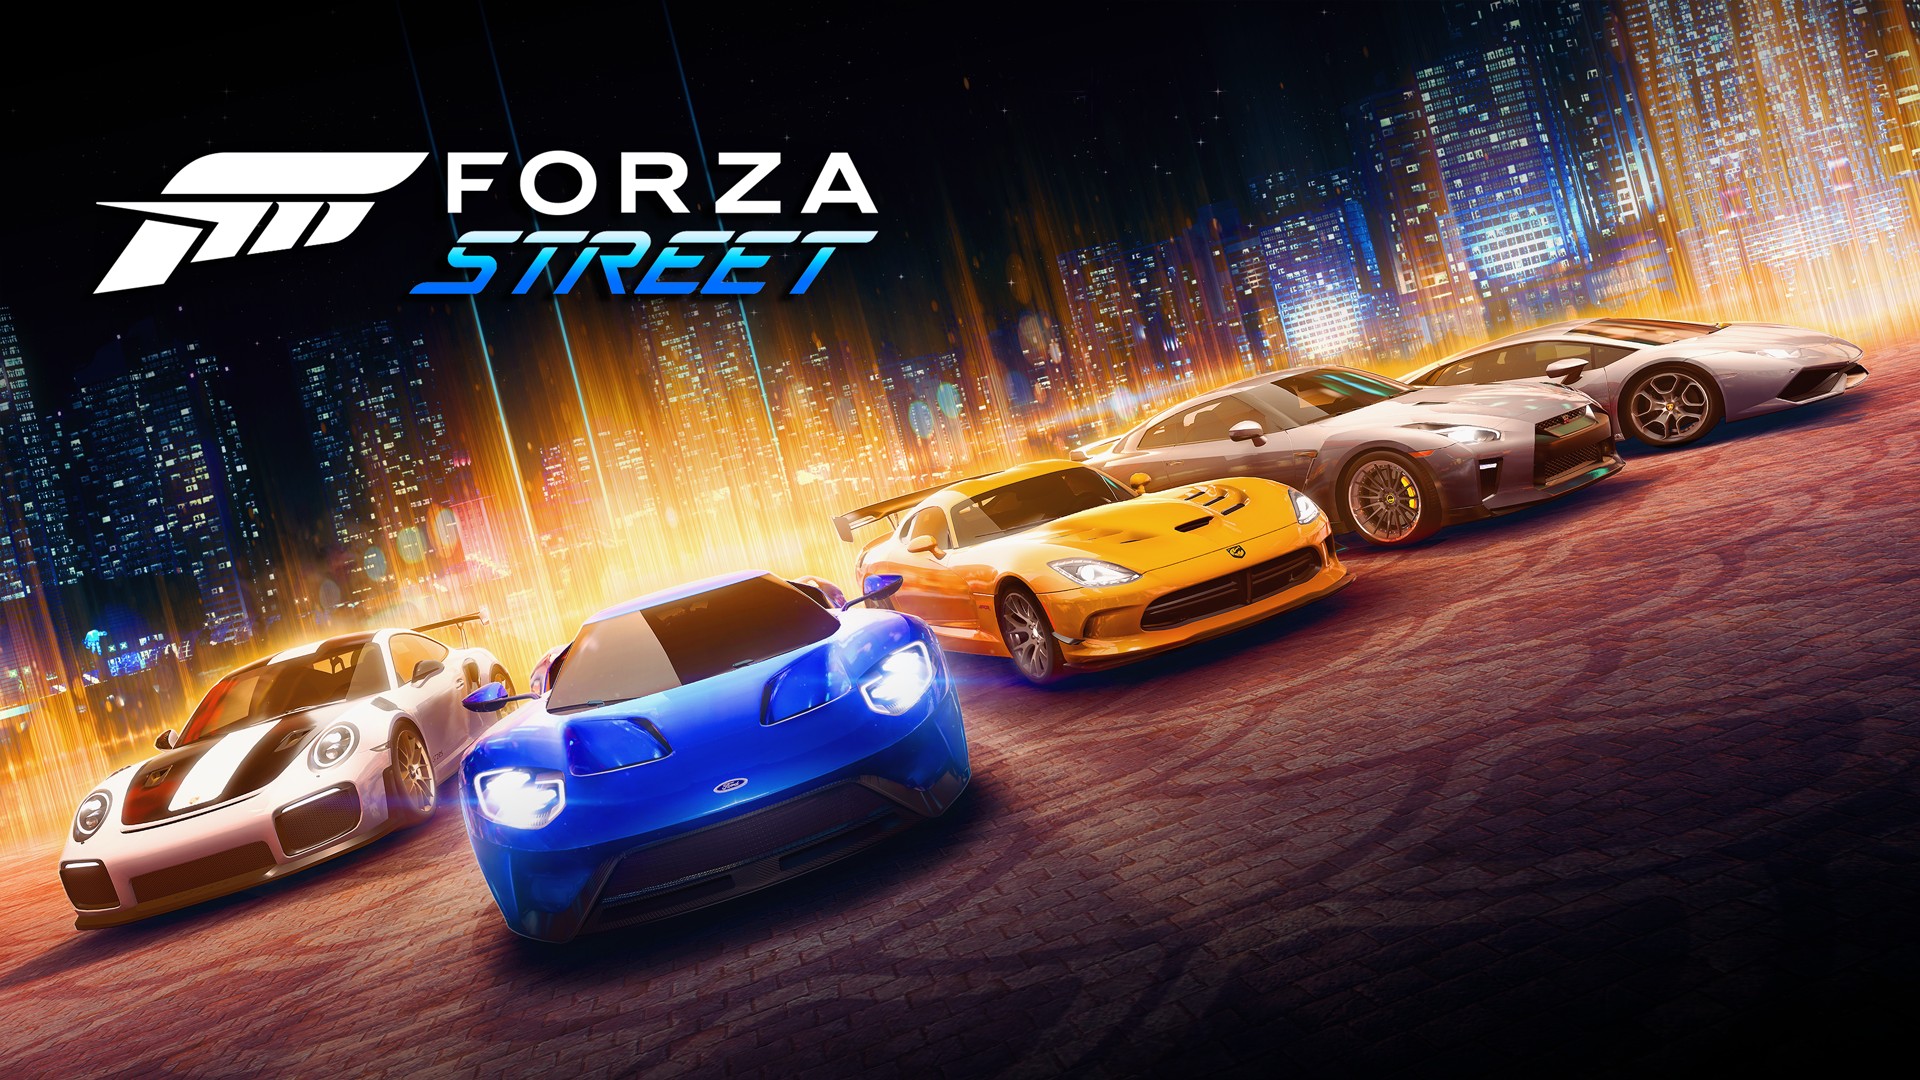 Video For Forza Street Now Available on iOS and Android!